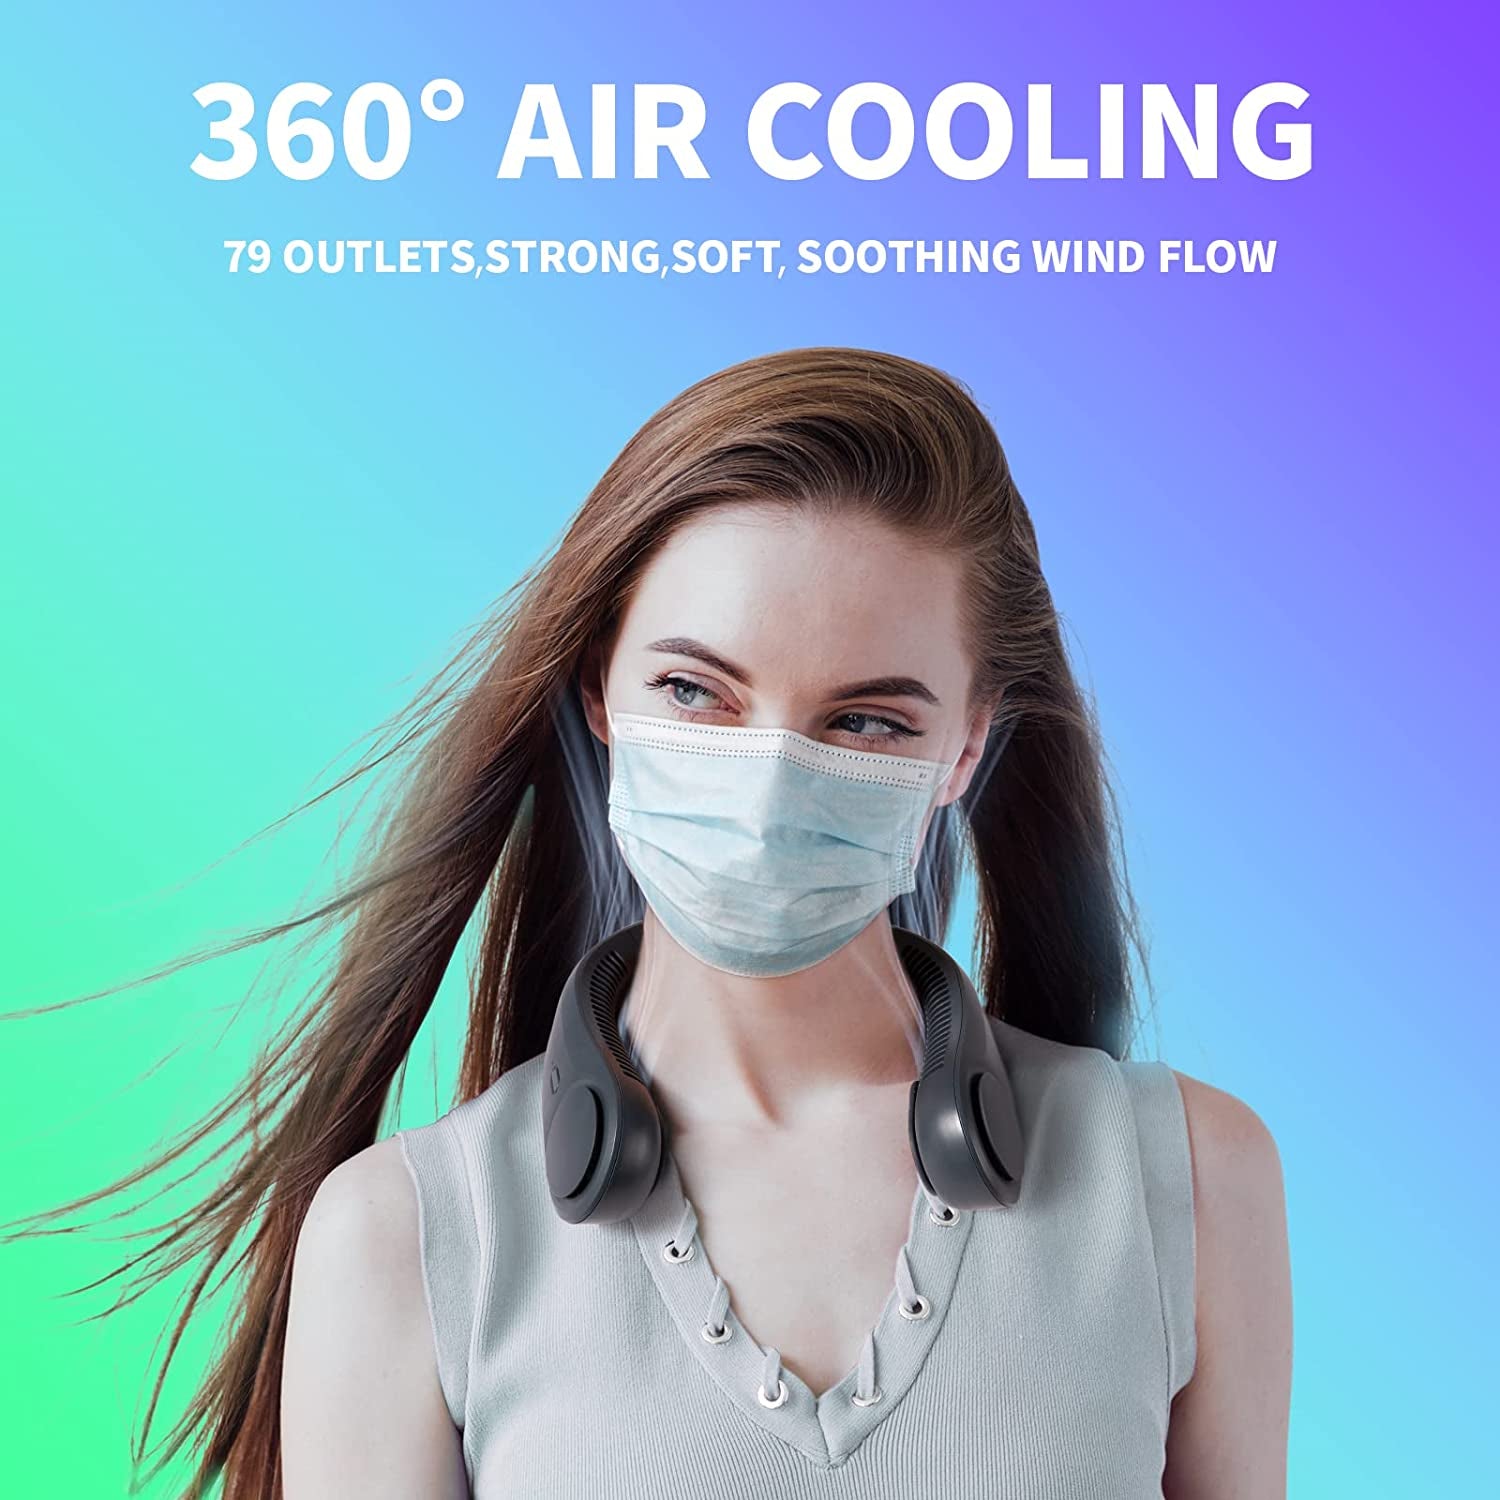 "Premium Hands-Free Portable Neck Fan with Triple Motors, High-Capacity 4000mAh Battery, USB Rechargeable, 3 Speeds, Silent Bladeless Design - Stay Cool with Sophistication during Travel!"